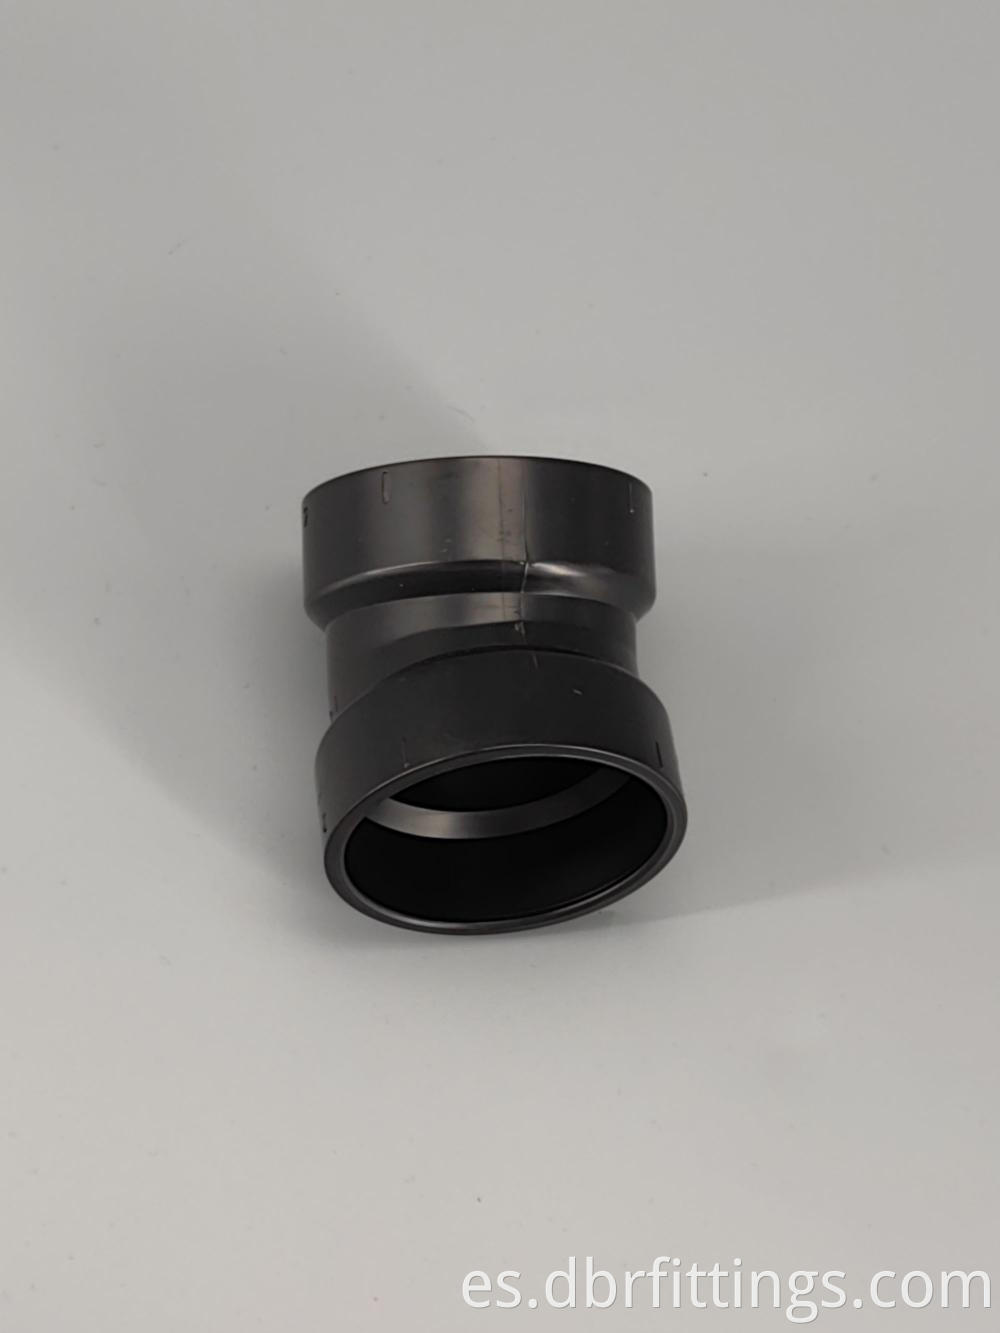 cUPC ABS fittings 22.5 ELBOW for sewer system